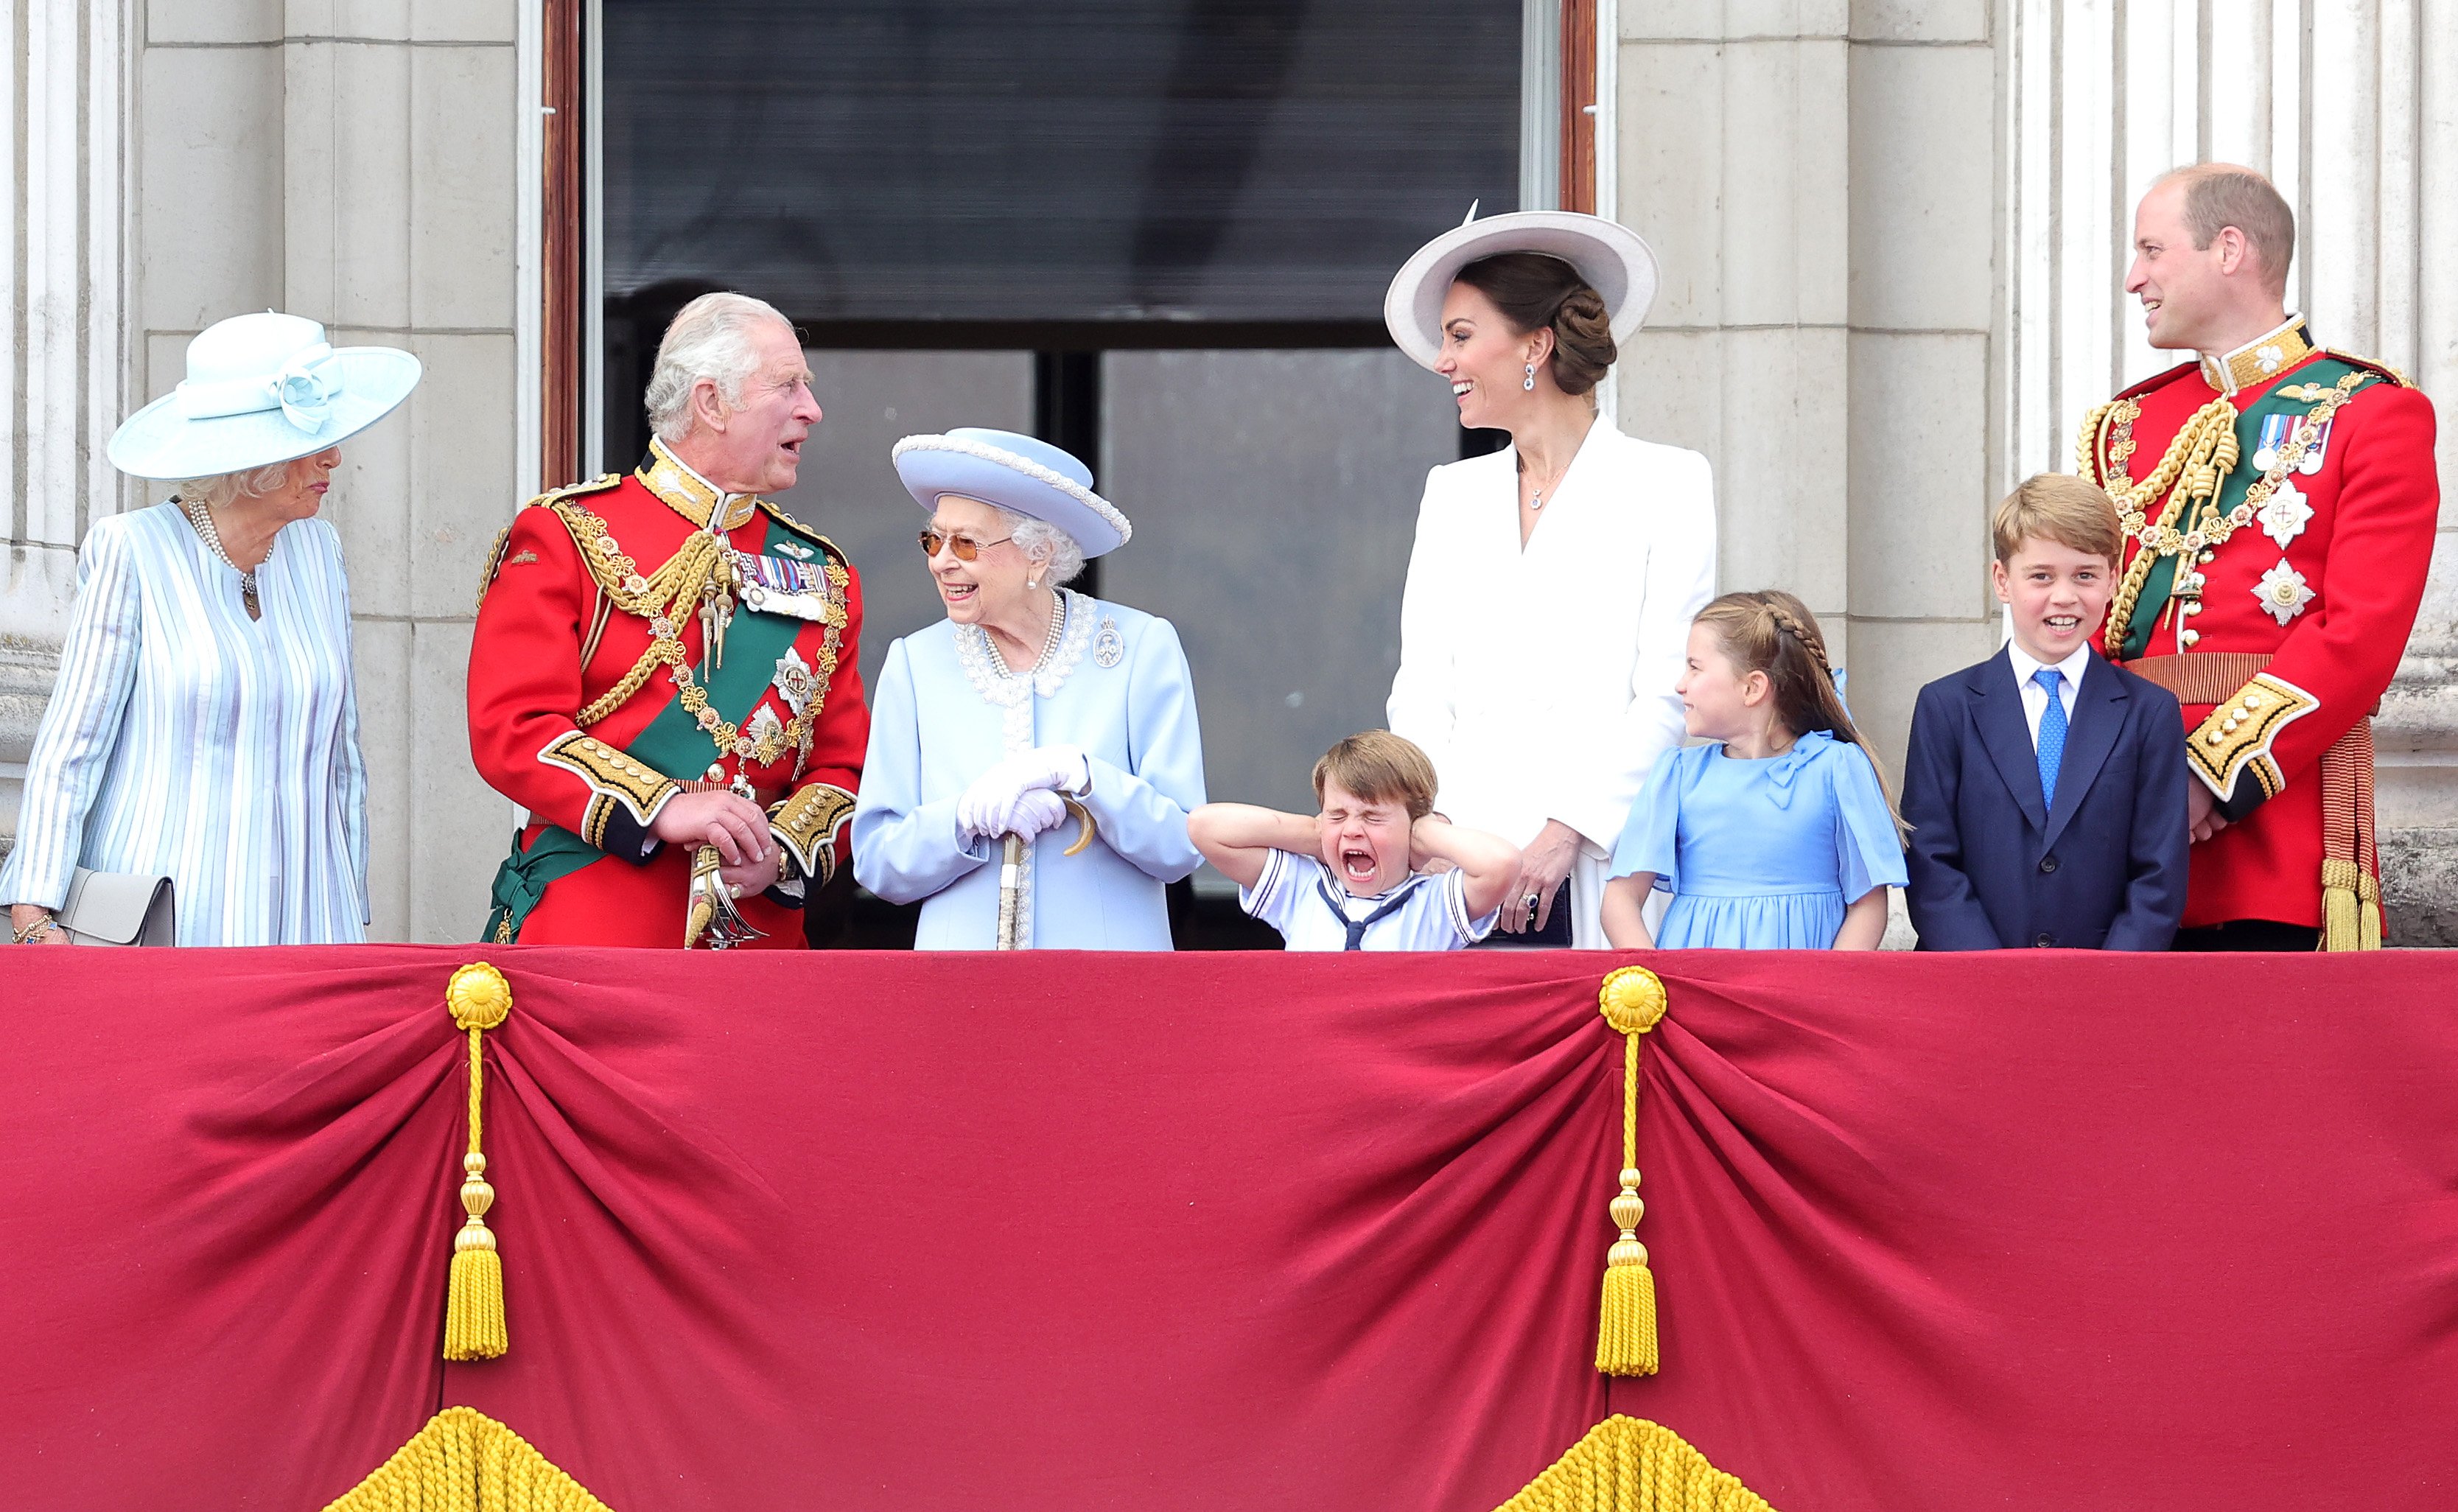 Queen Elizabeth II smiles on the balcony of Buckingham Palace during Trooping the Colour alongside Camilla, Duchess of Cornwall, Prince Charles, Prince Louis of Cambridge, Catherine, Duchess of Cambridge, Princess Charlotte of Cambridge, Prince George of Cambridge, and Prince William on June 02, 2022 in London, England | Source: Getty Images